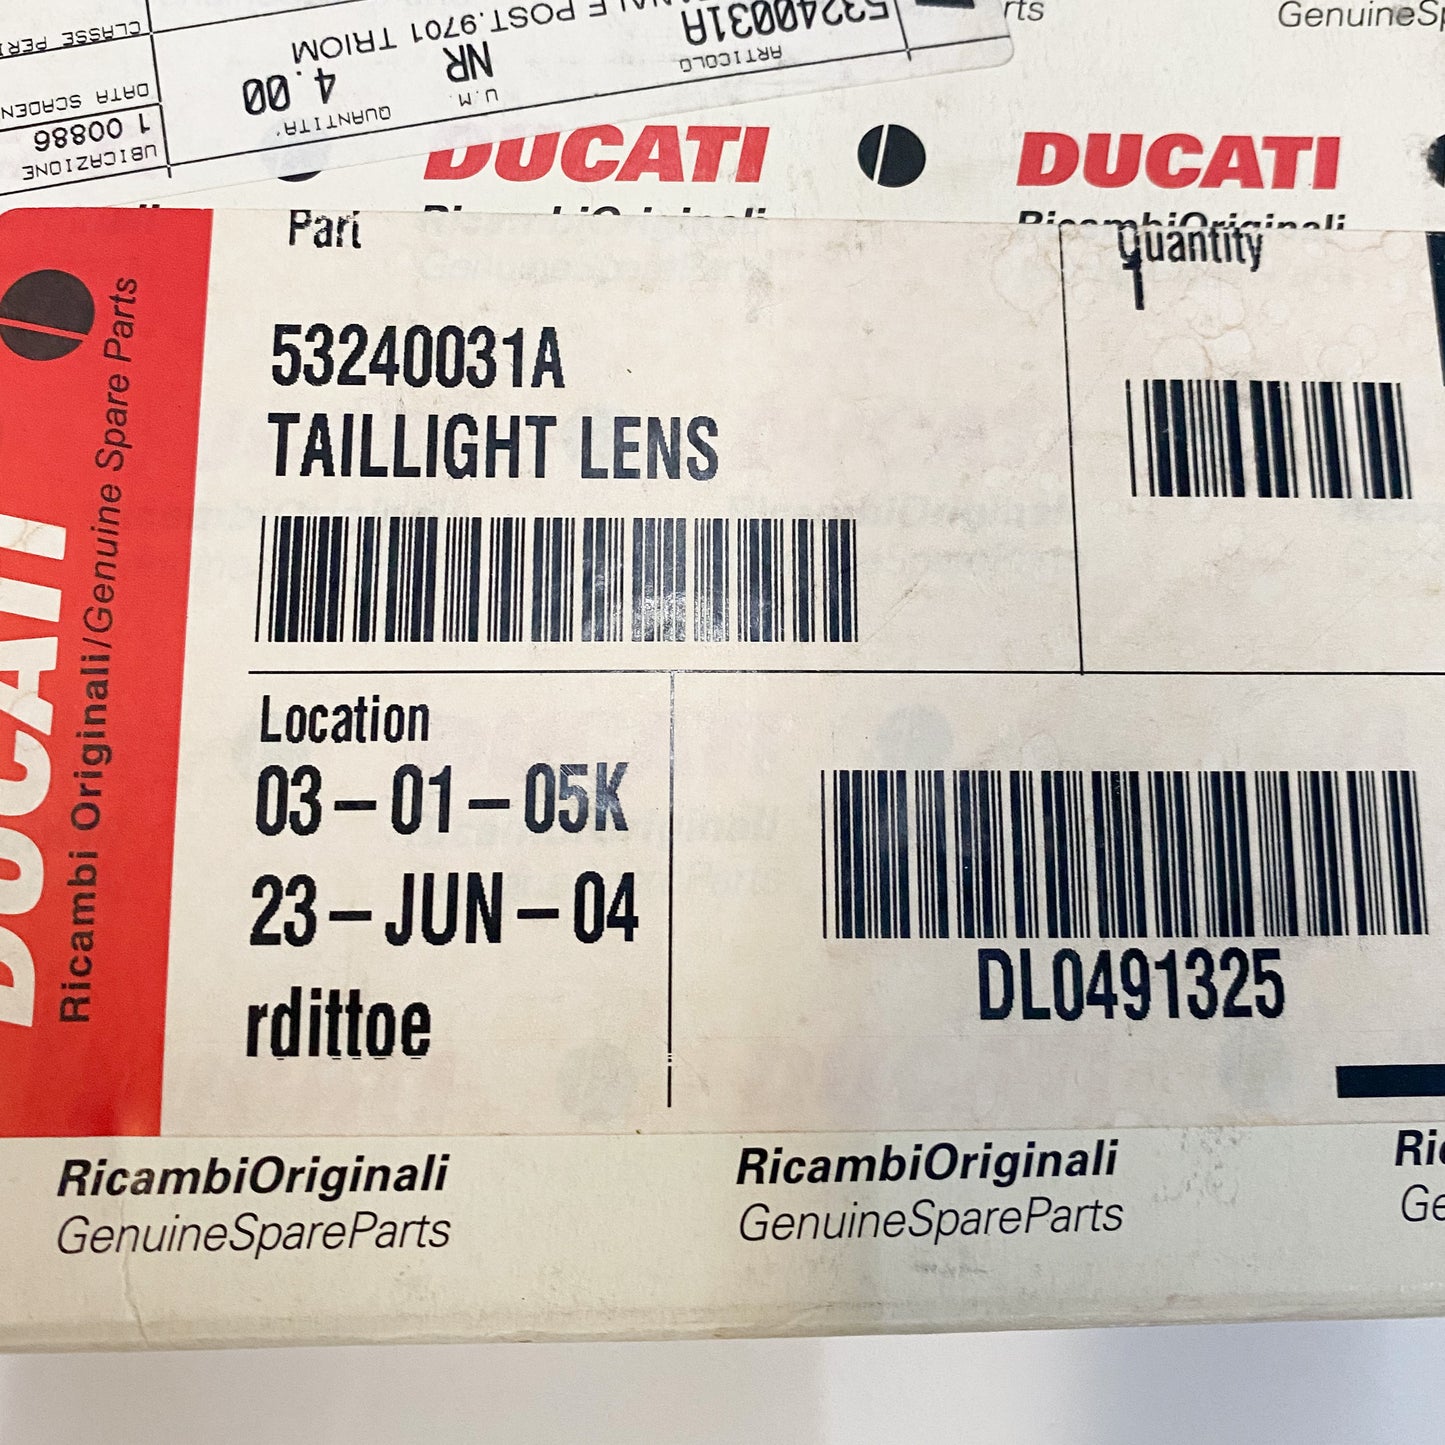 Ducati OEM Supersport Tail Lens 53240031A